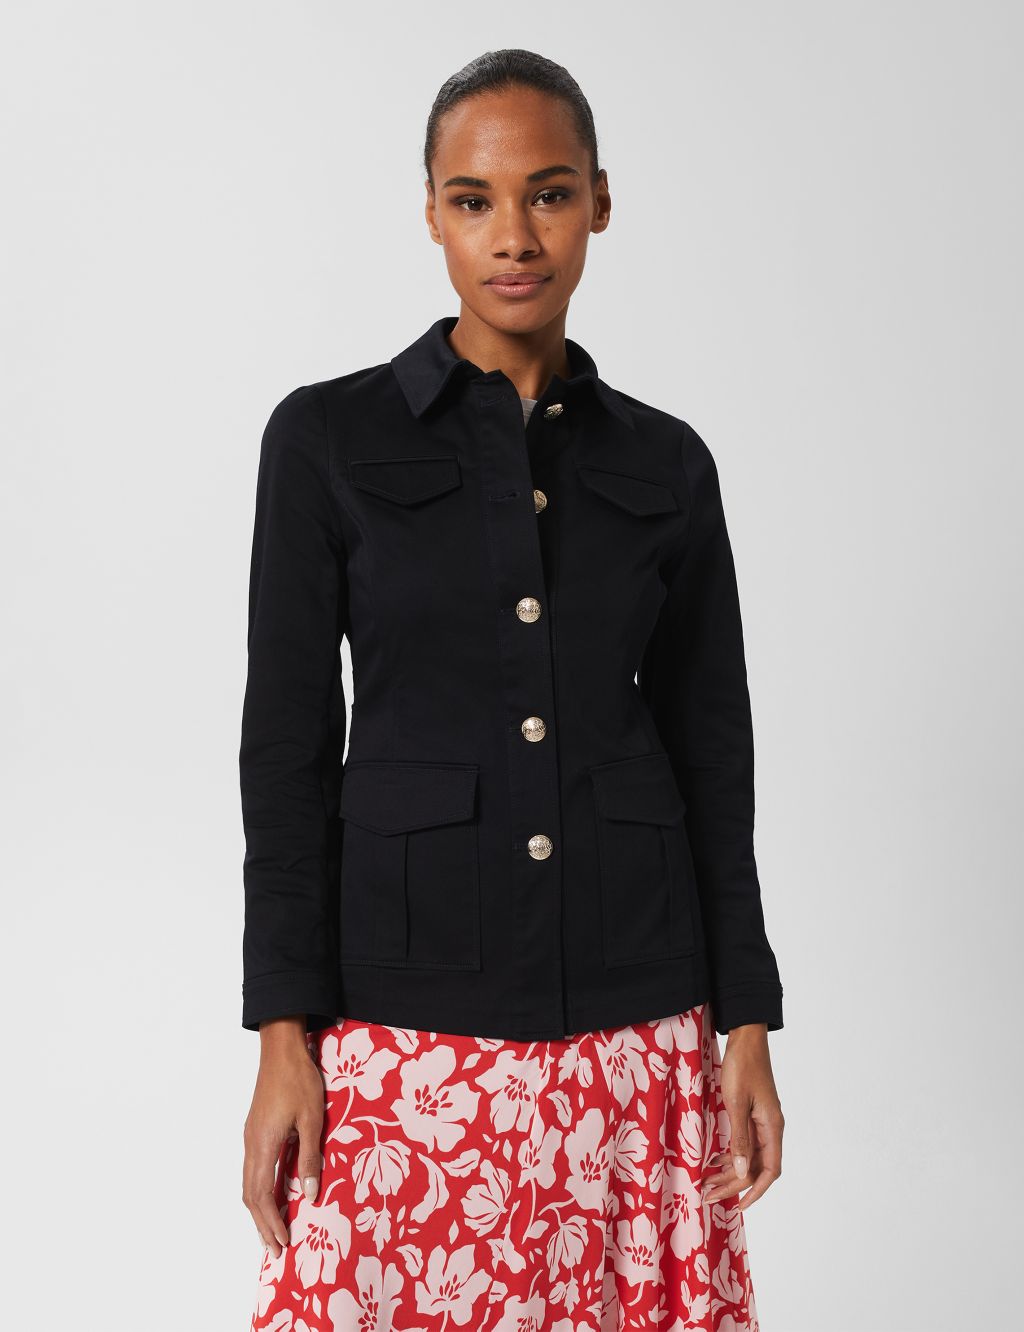 Cotton Rich Collared Jacket image 1